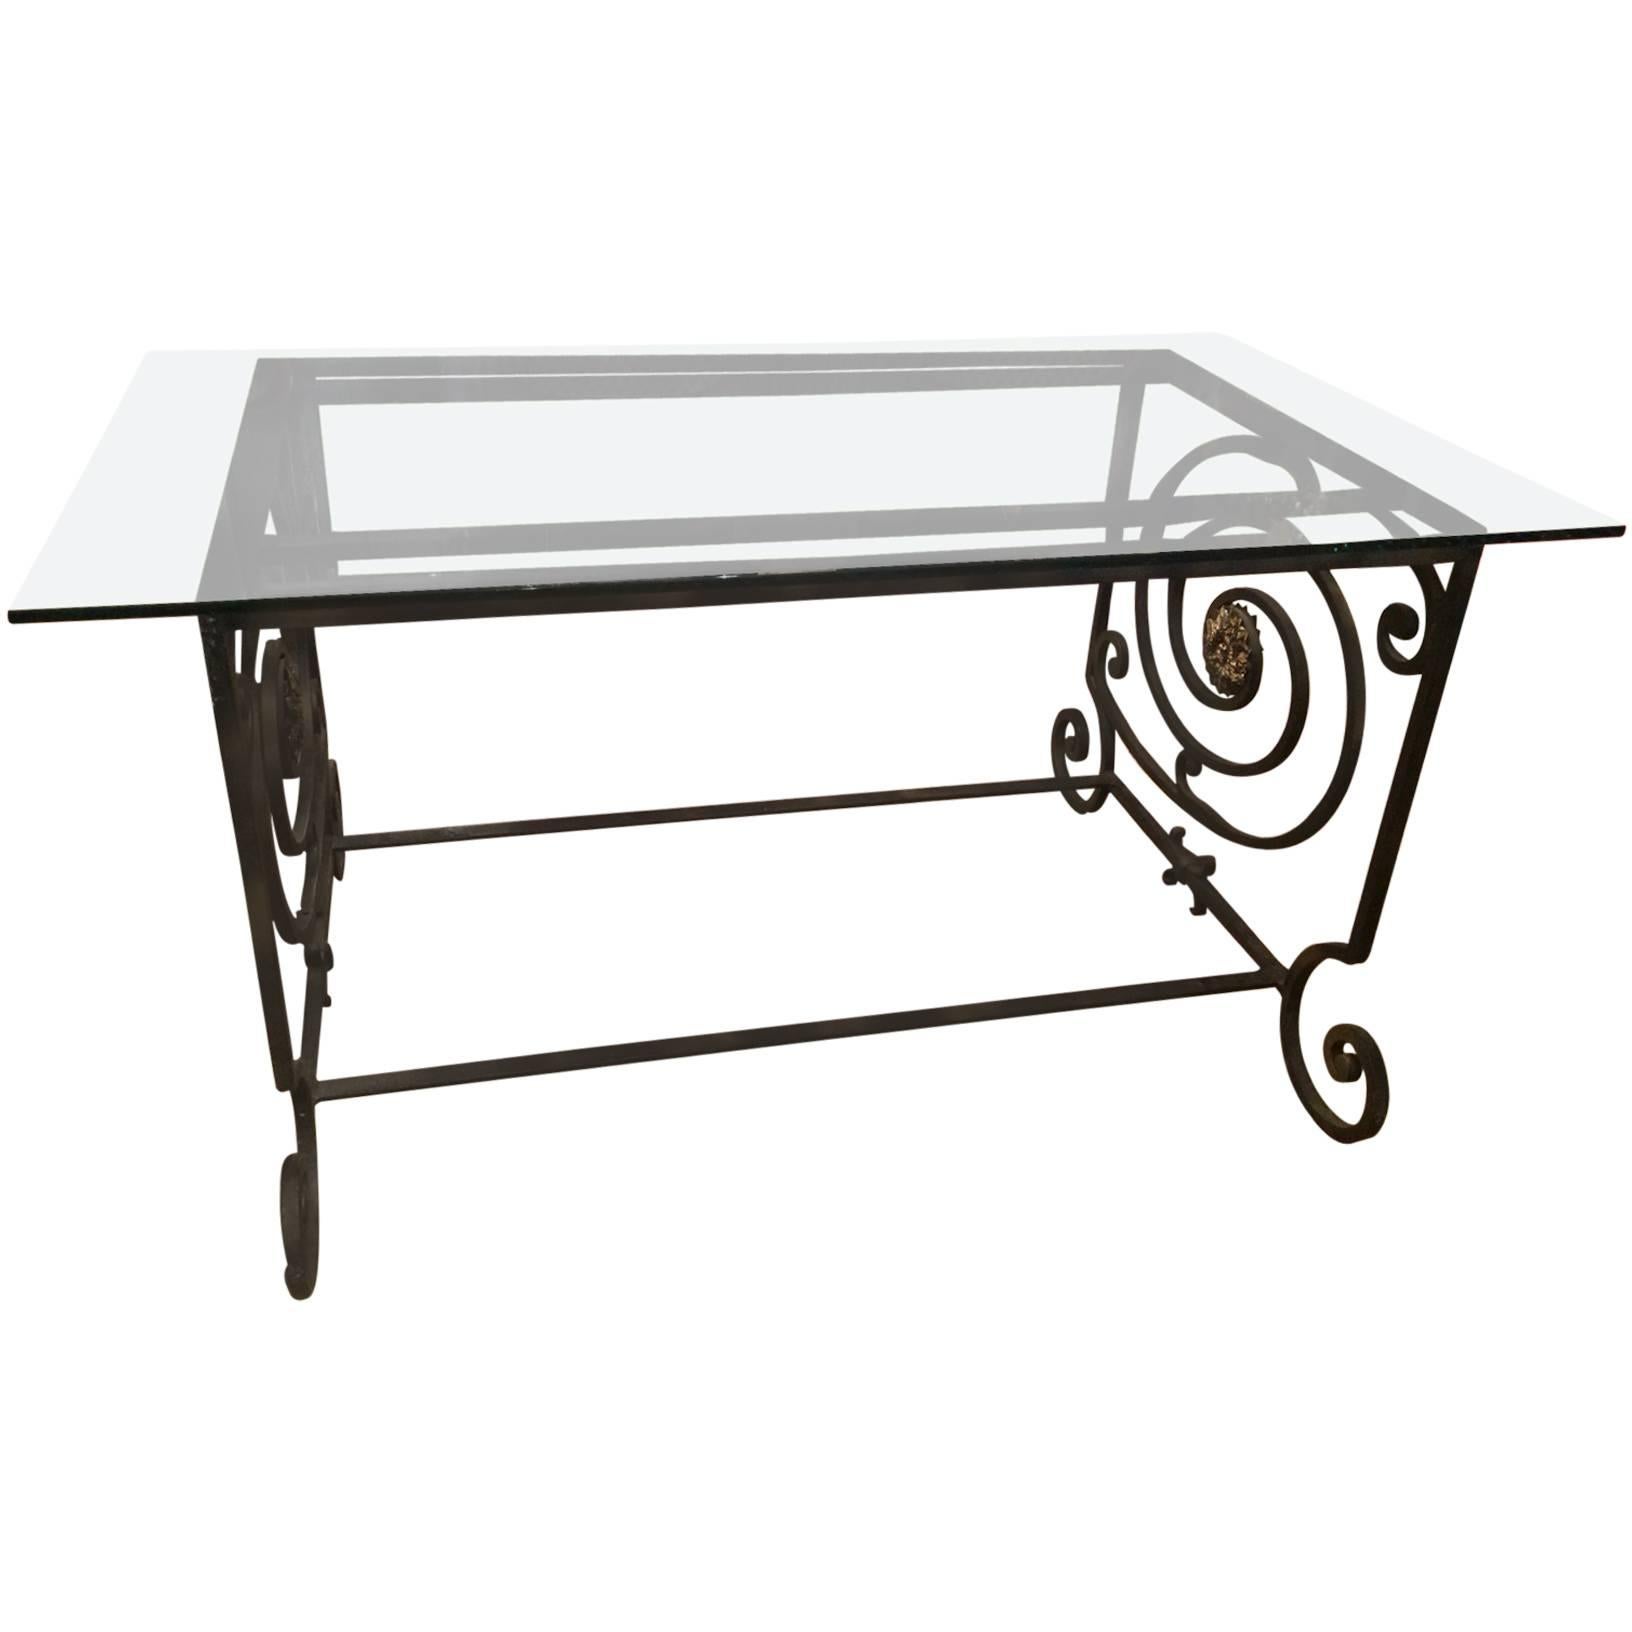 One of a Kind Vintage New Orleans Iron Dining Table